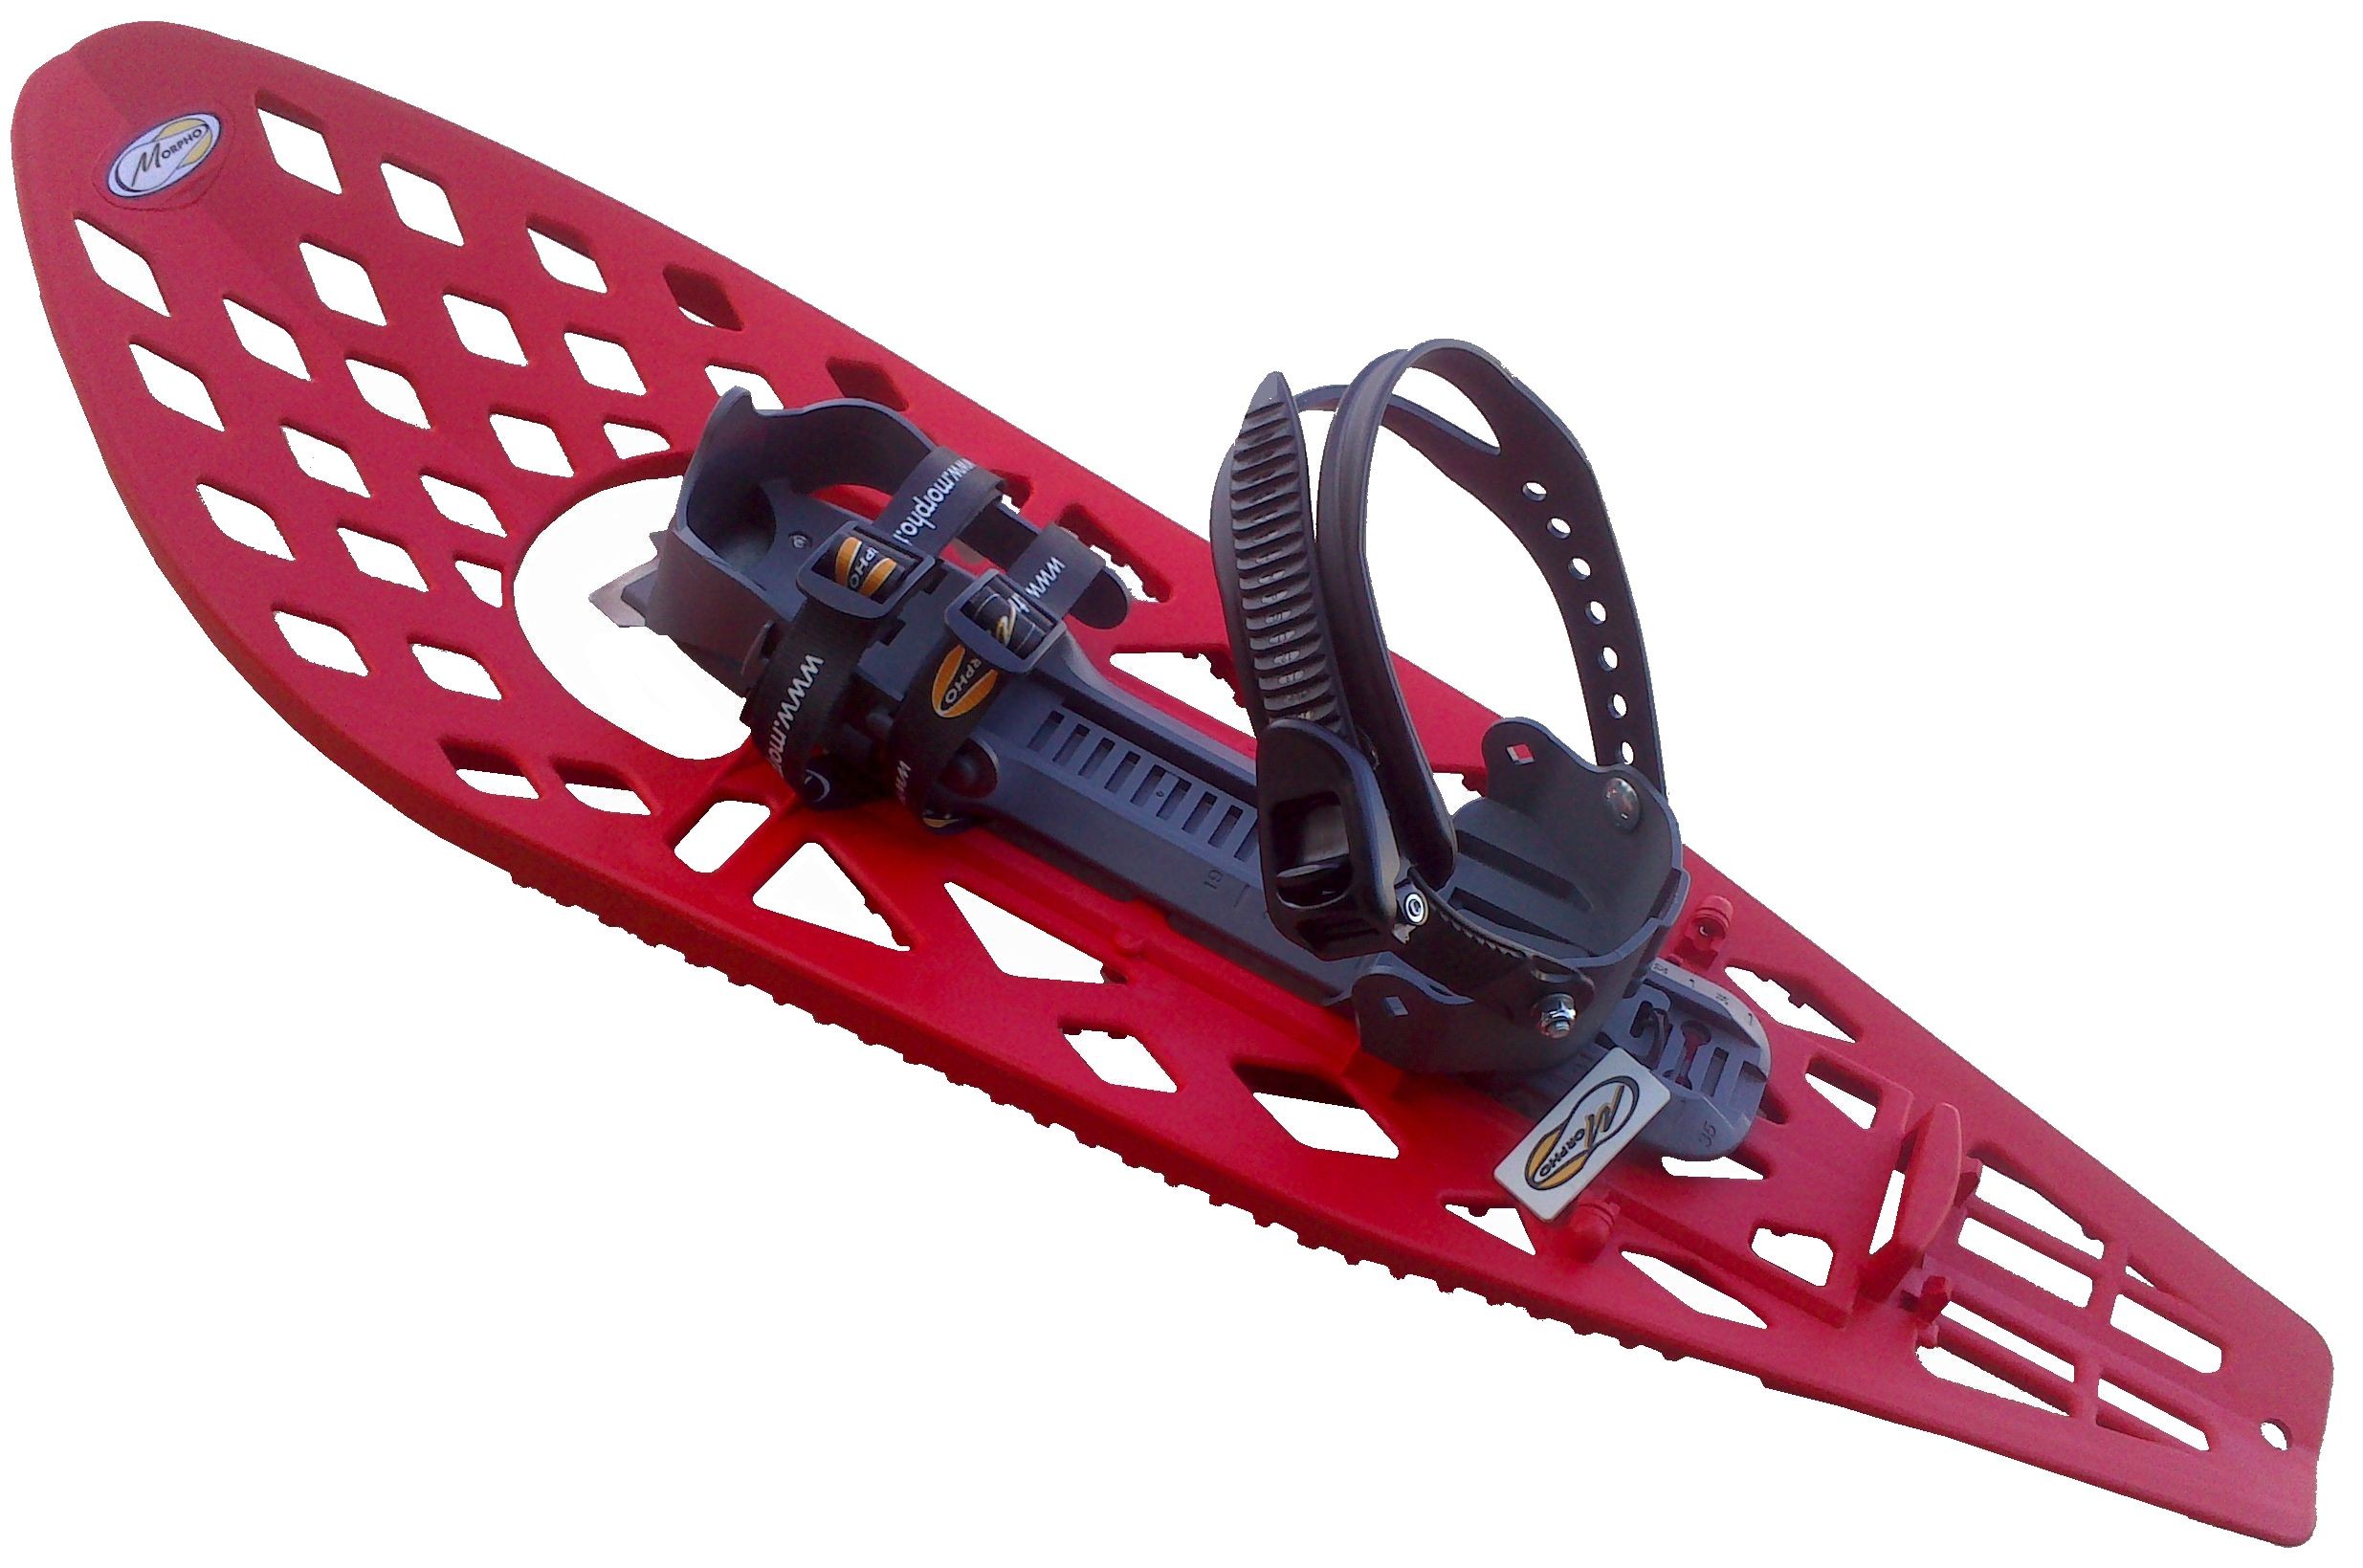 Snowboard Type with Ankle Straps and No Pad Morpho Trimoette Adult Snowshoes Light 